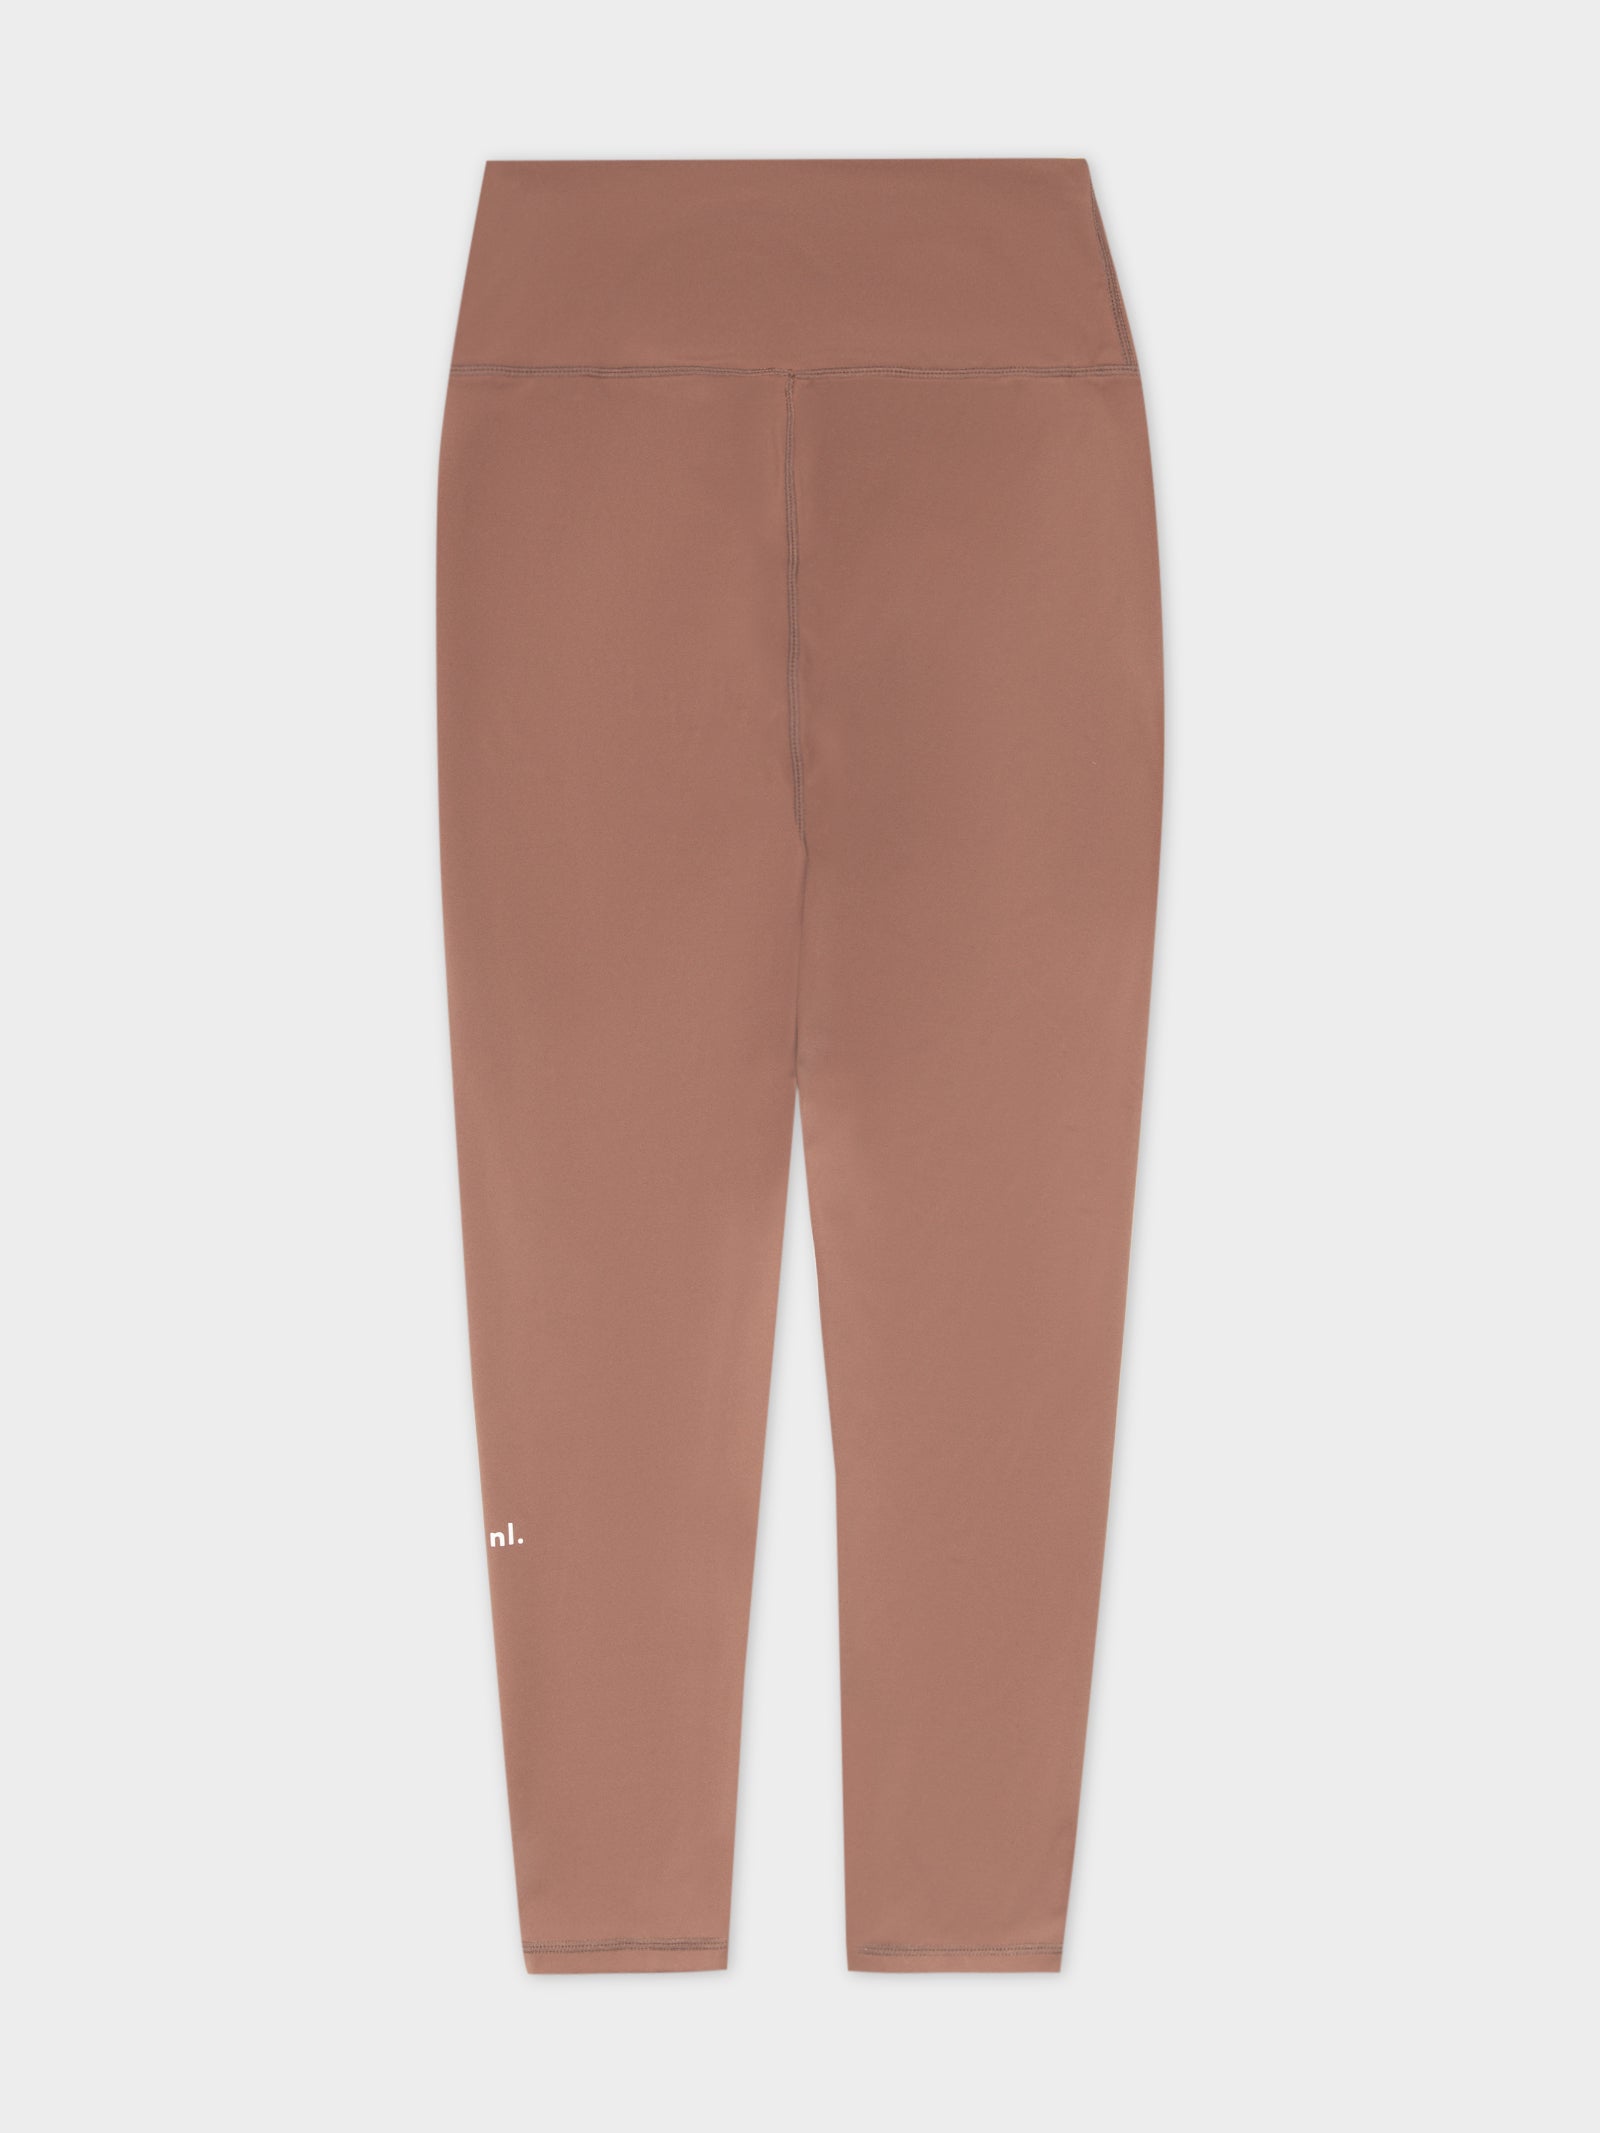 Nude Active High-Rise 7/8 Leggings in Rosewood